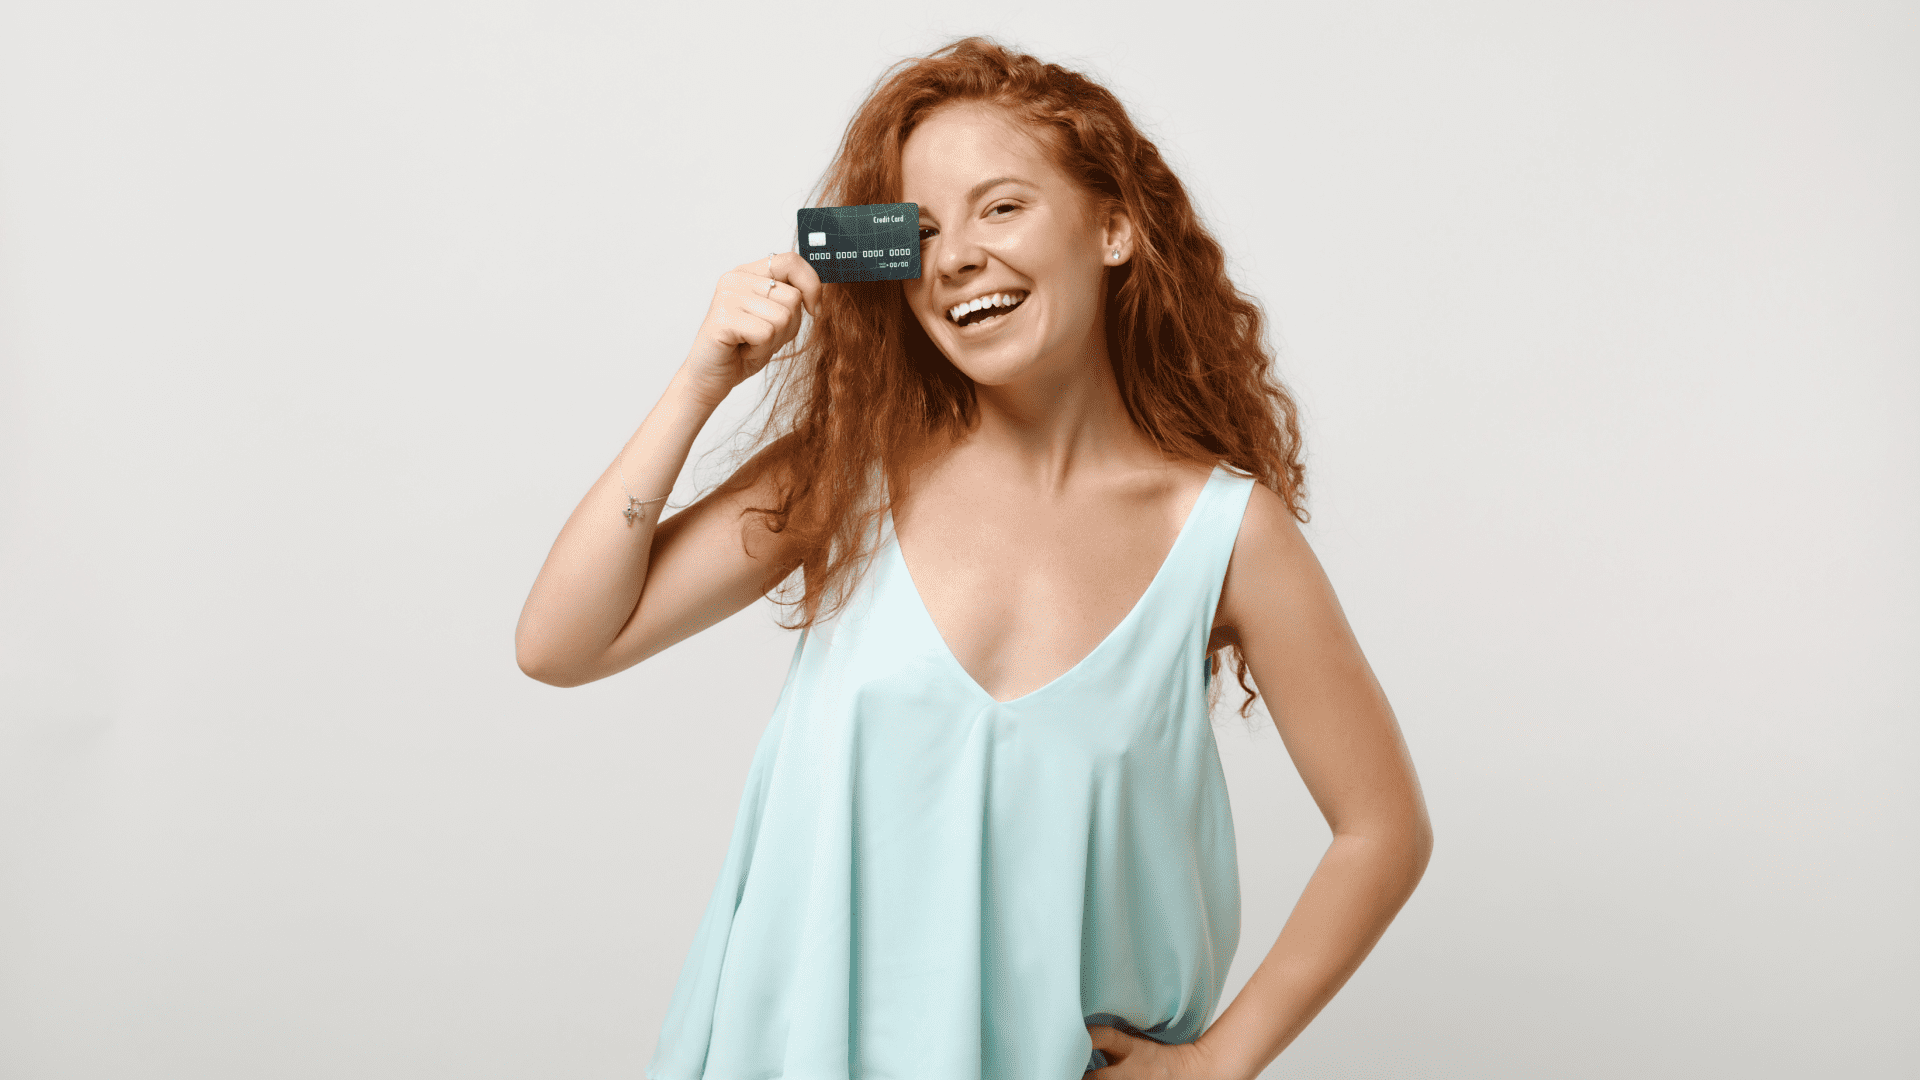 young redhead woman laughing and holding credit card